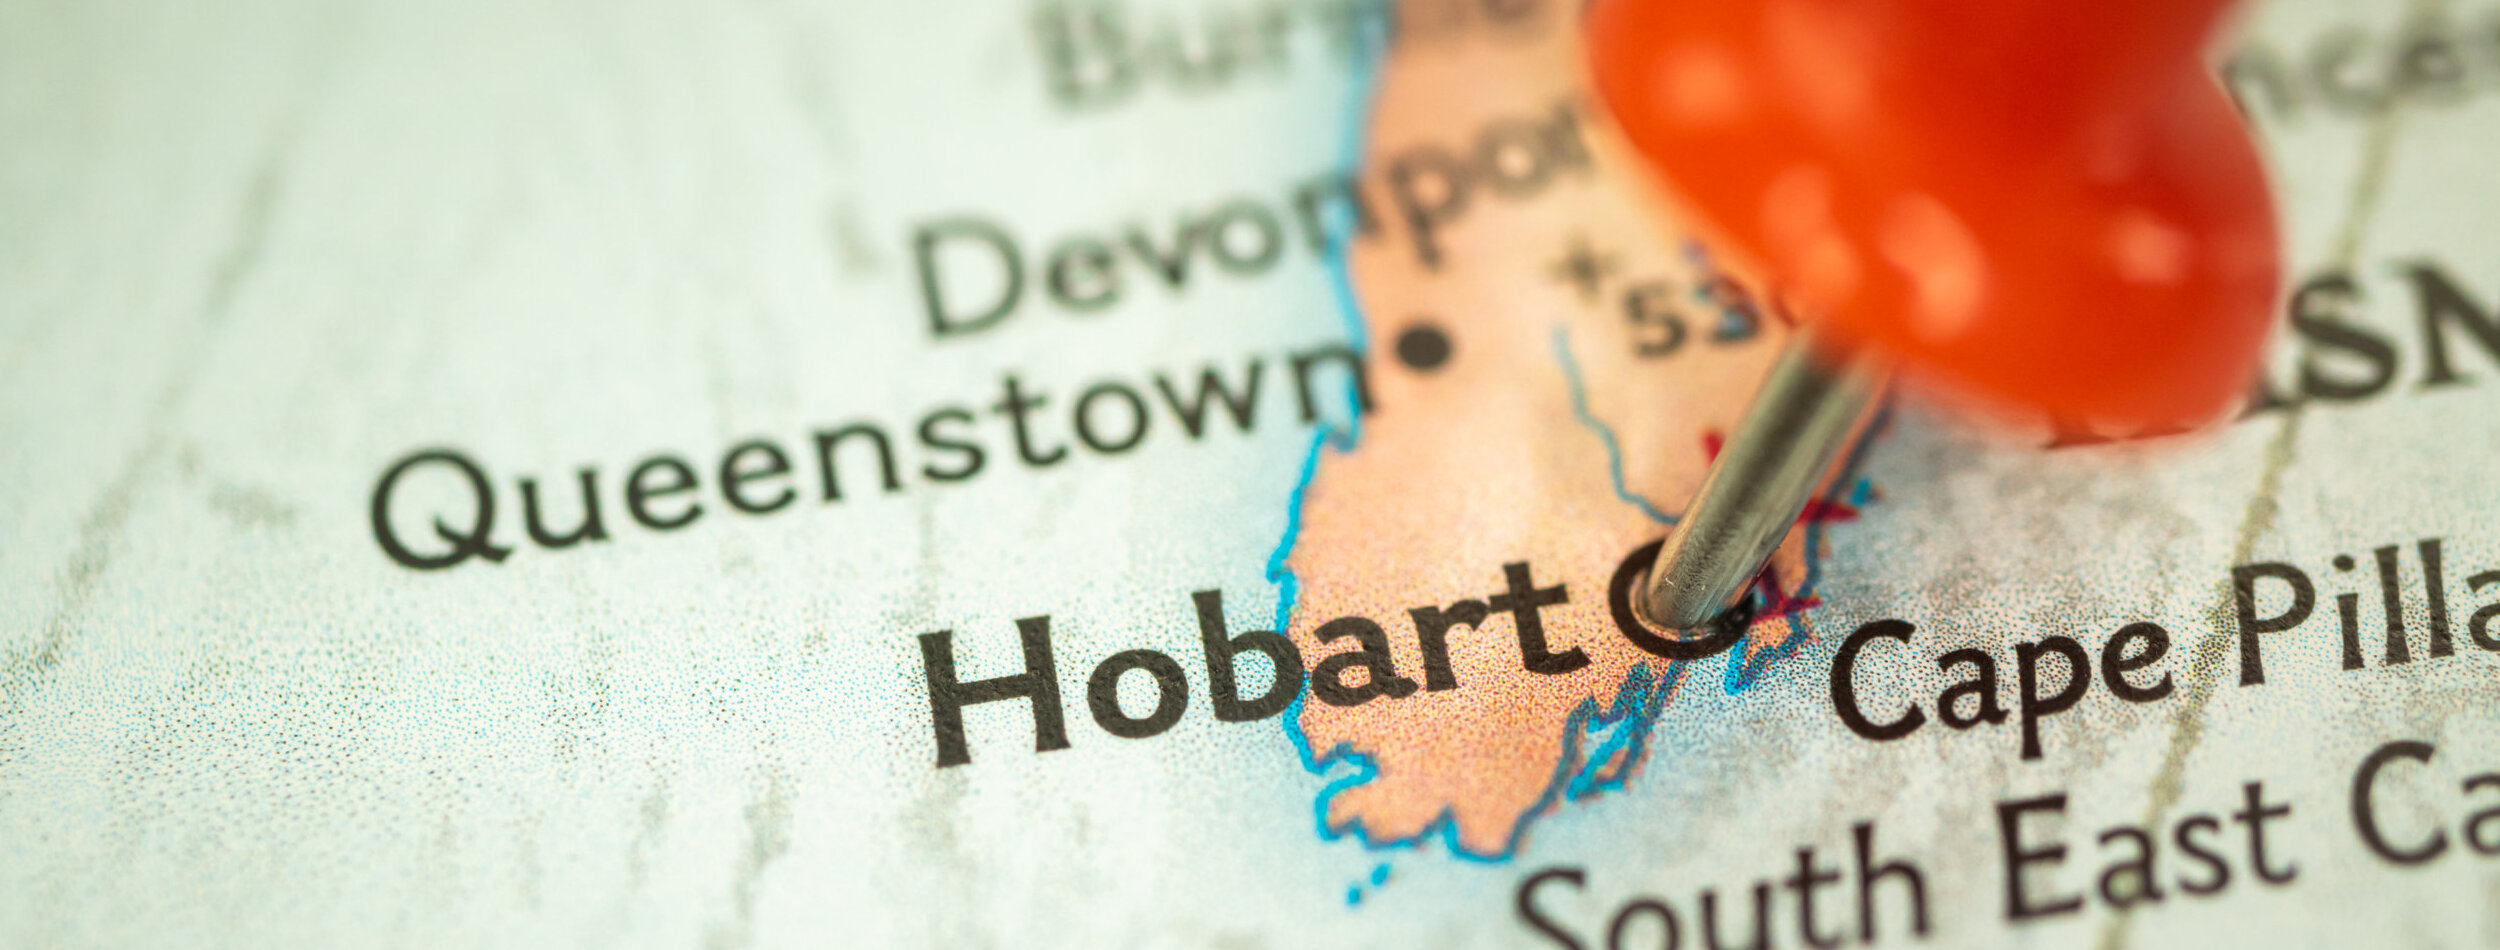 Location Hobart in Tasmania, map with push pin closeup, travel and journey concept, Australia